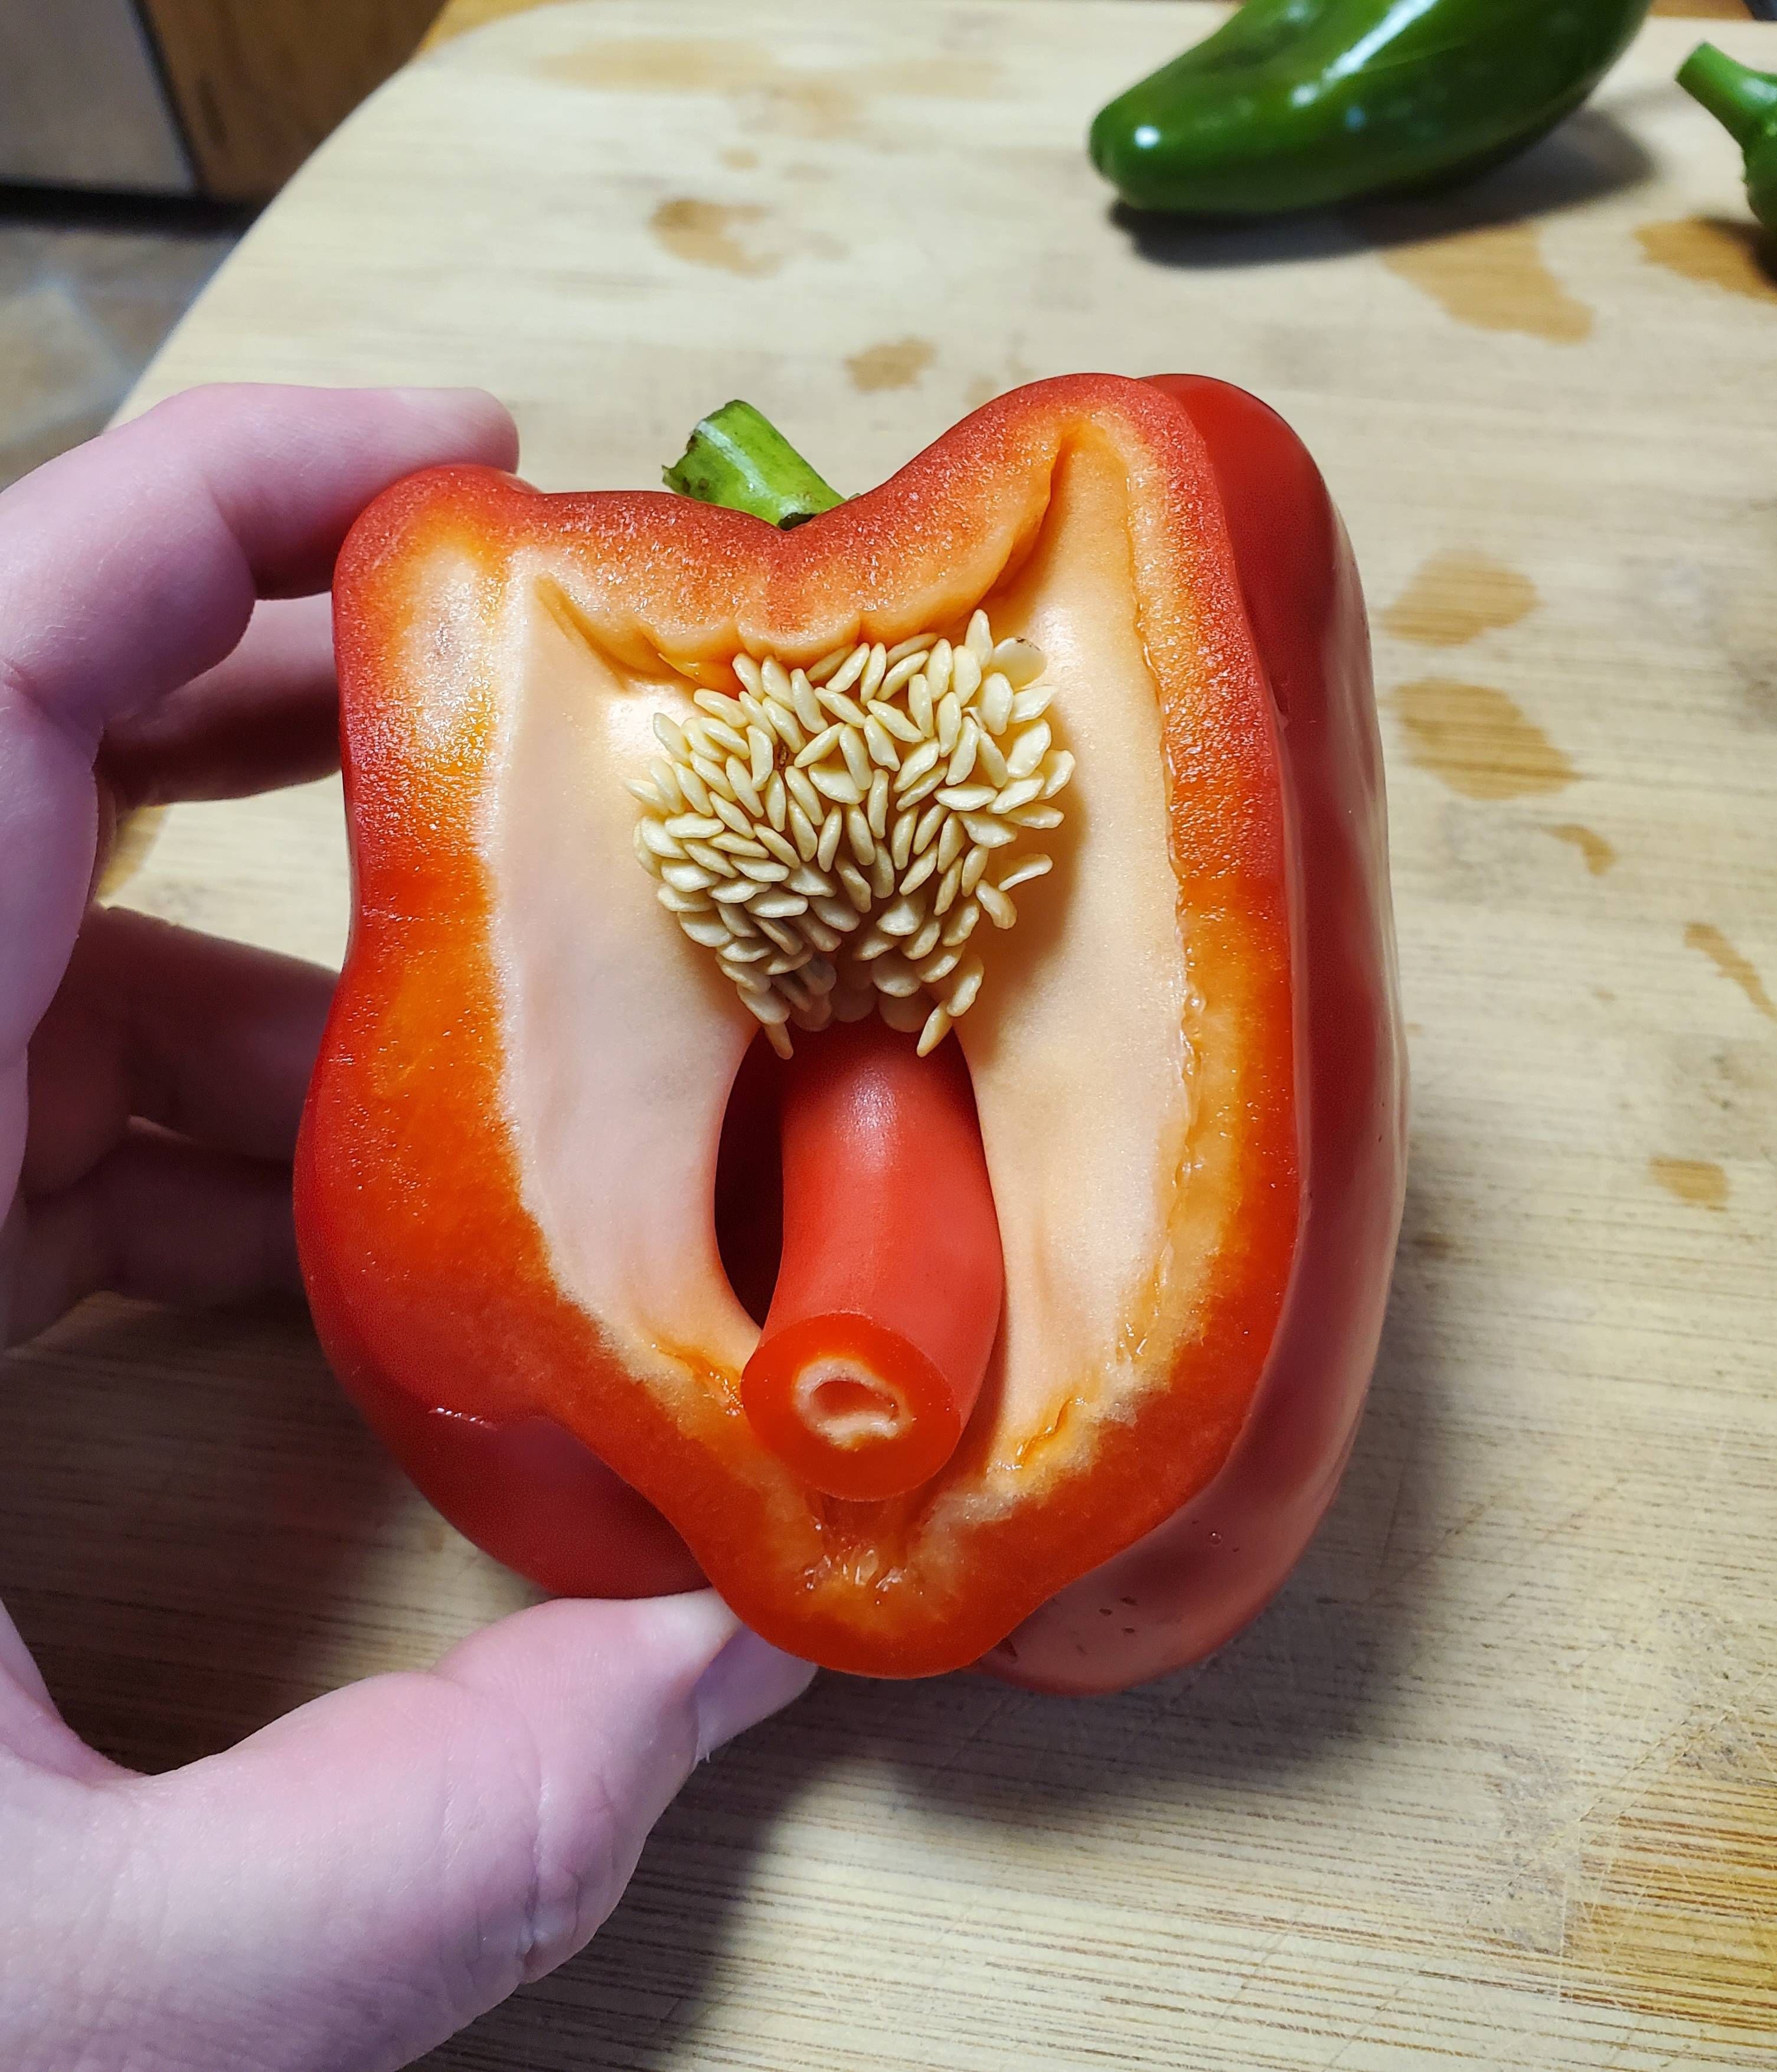 This bell pepper I just cut open makes me...uncomfortable.